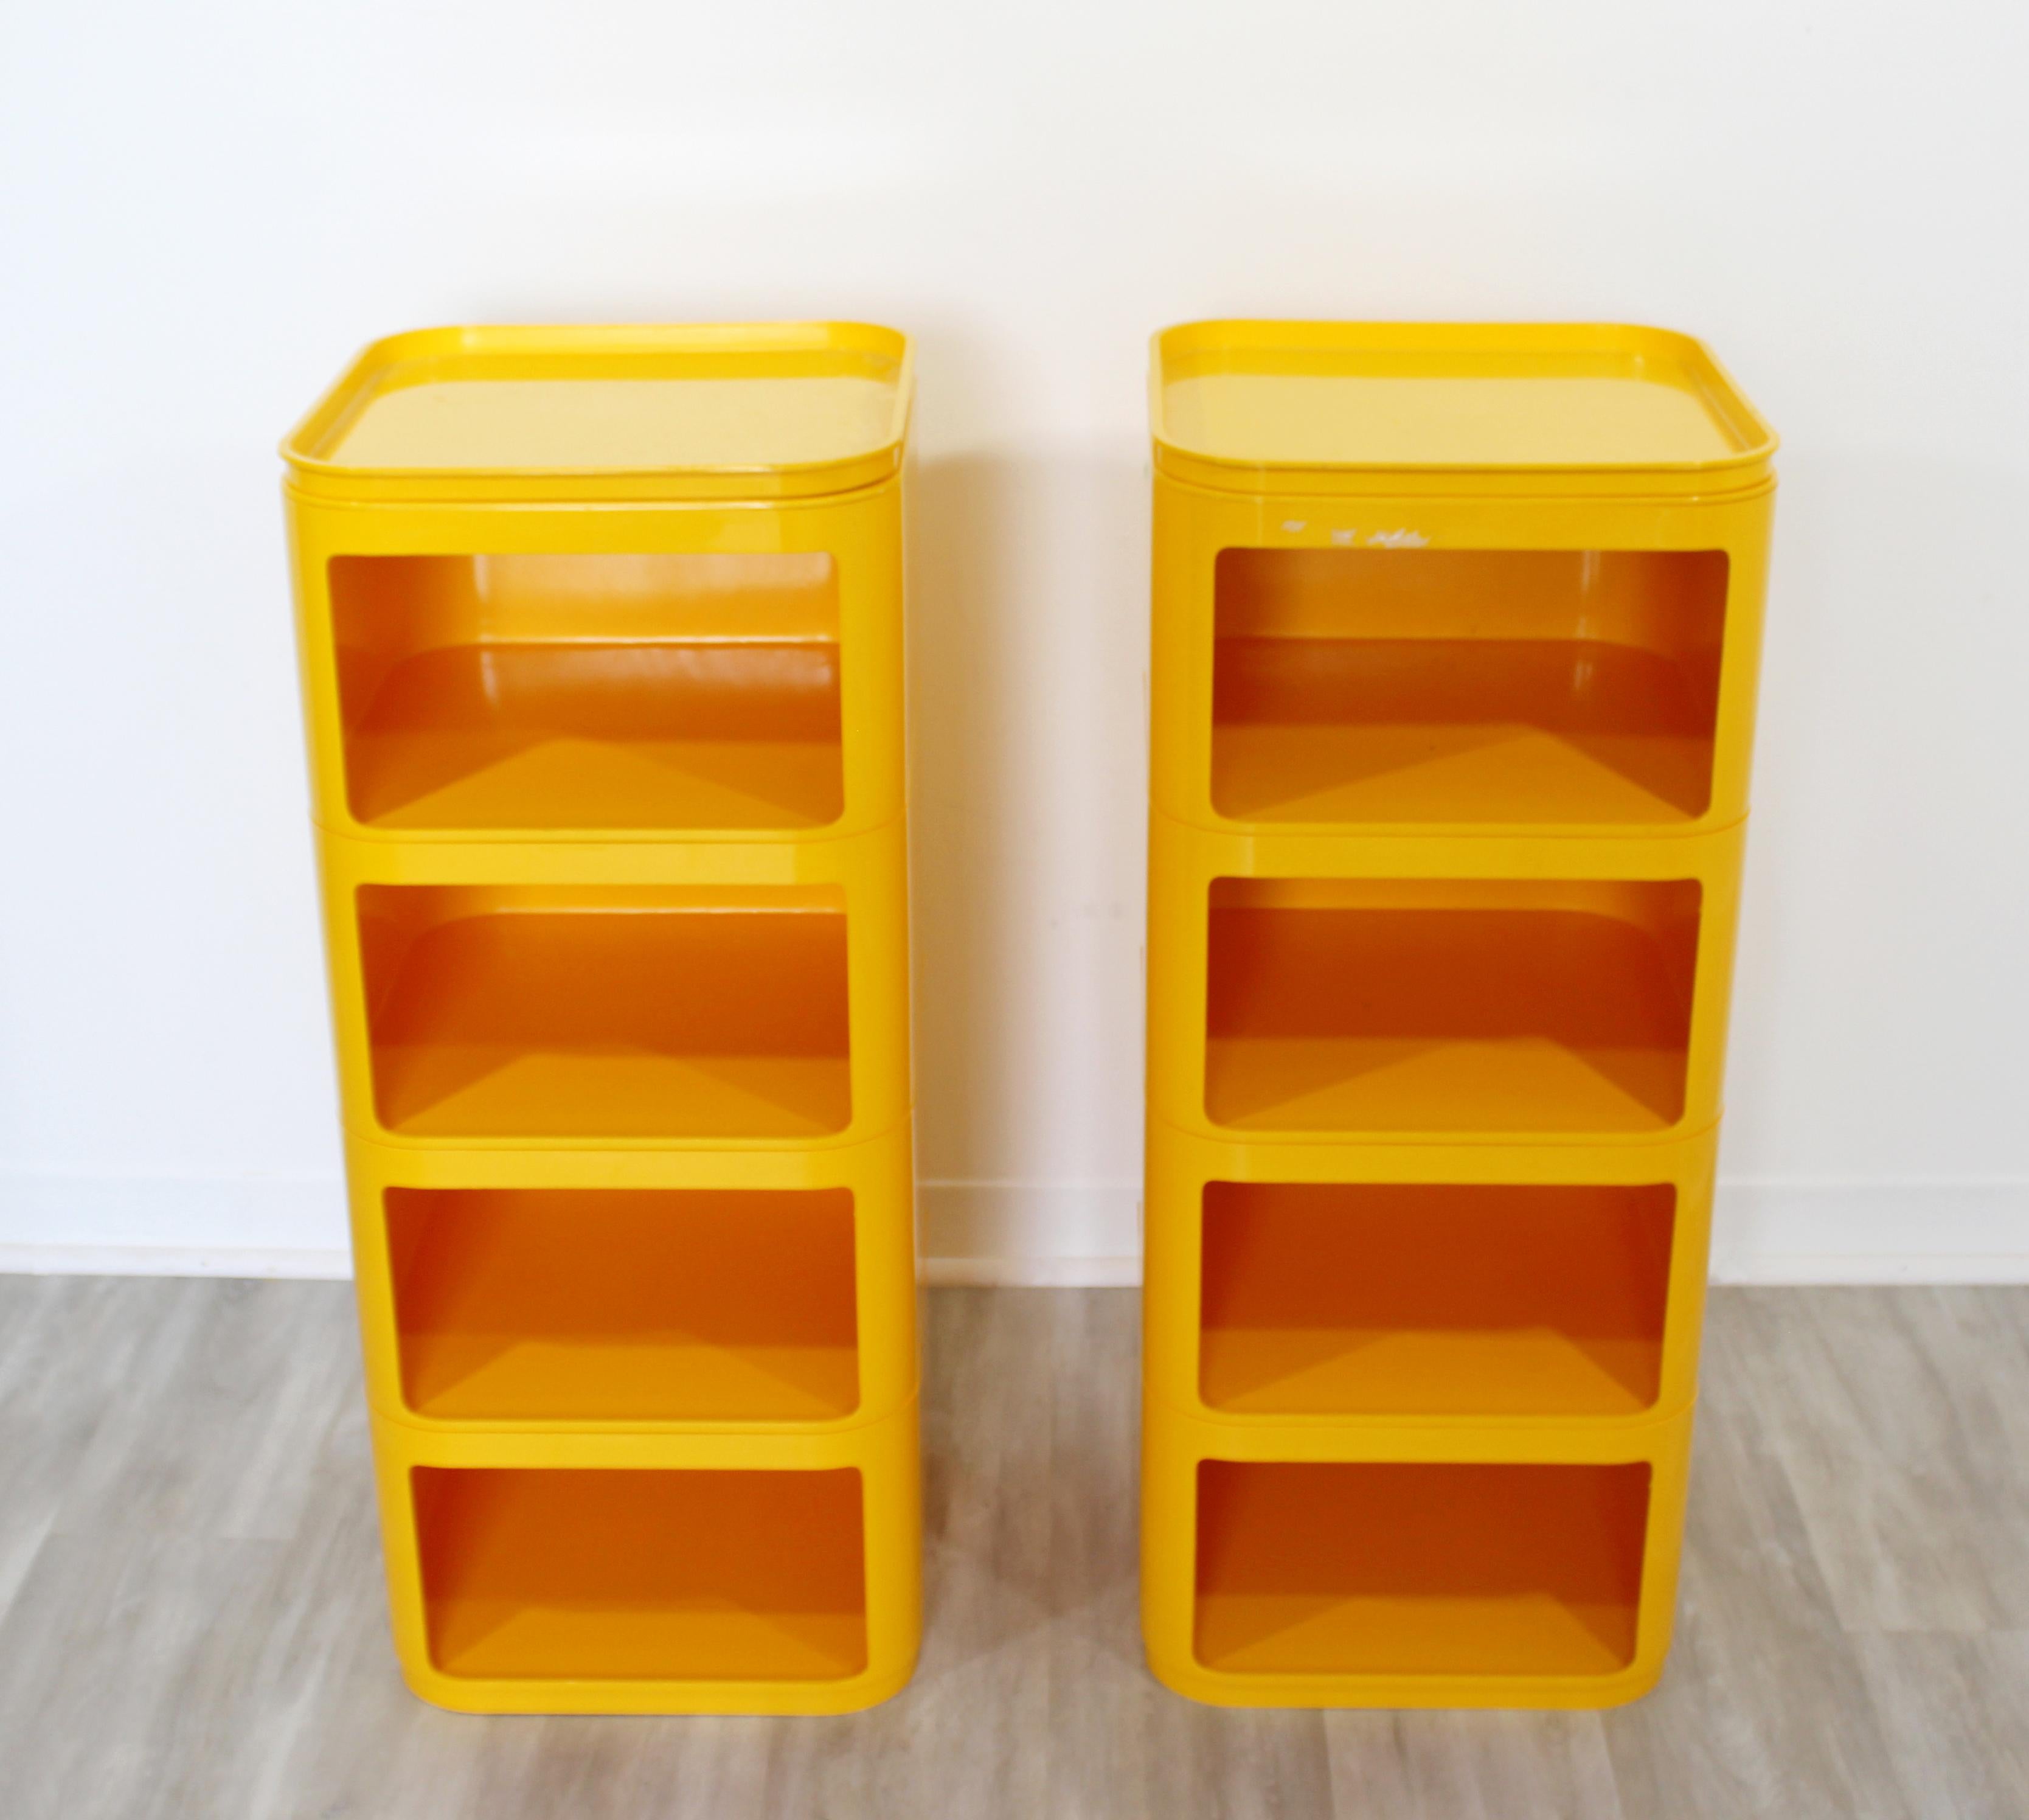 For your consideration is a fun pair of modular shelving units, by Anna Castelli for Kartell. In excellent vintage condition. The dimensions are 15